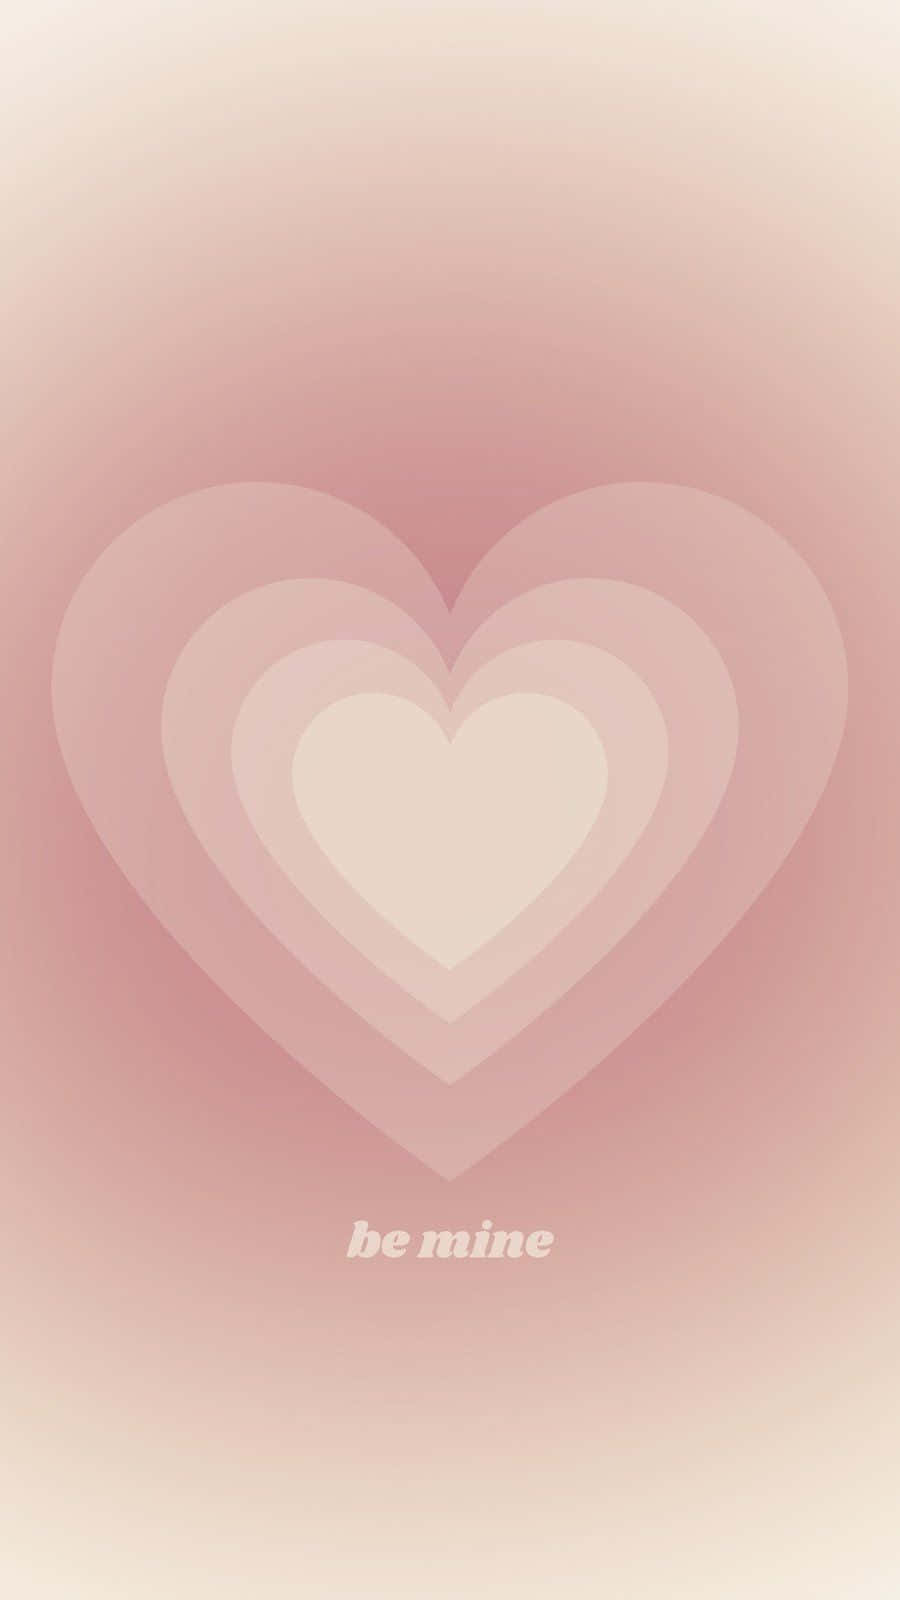 Concentric Hearts Valentine Background Wallpaper